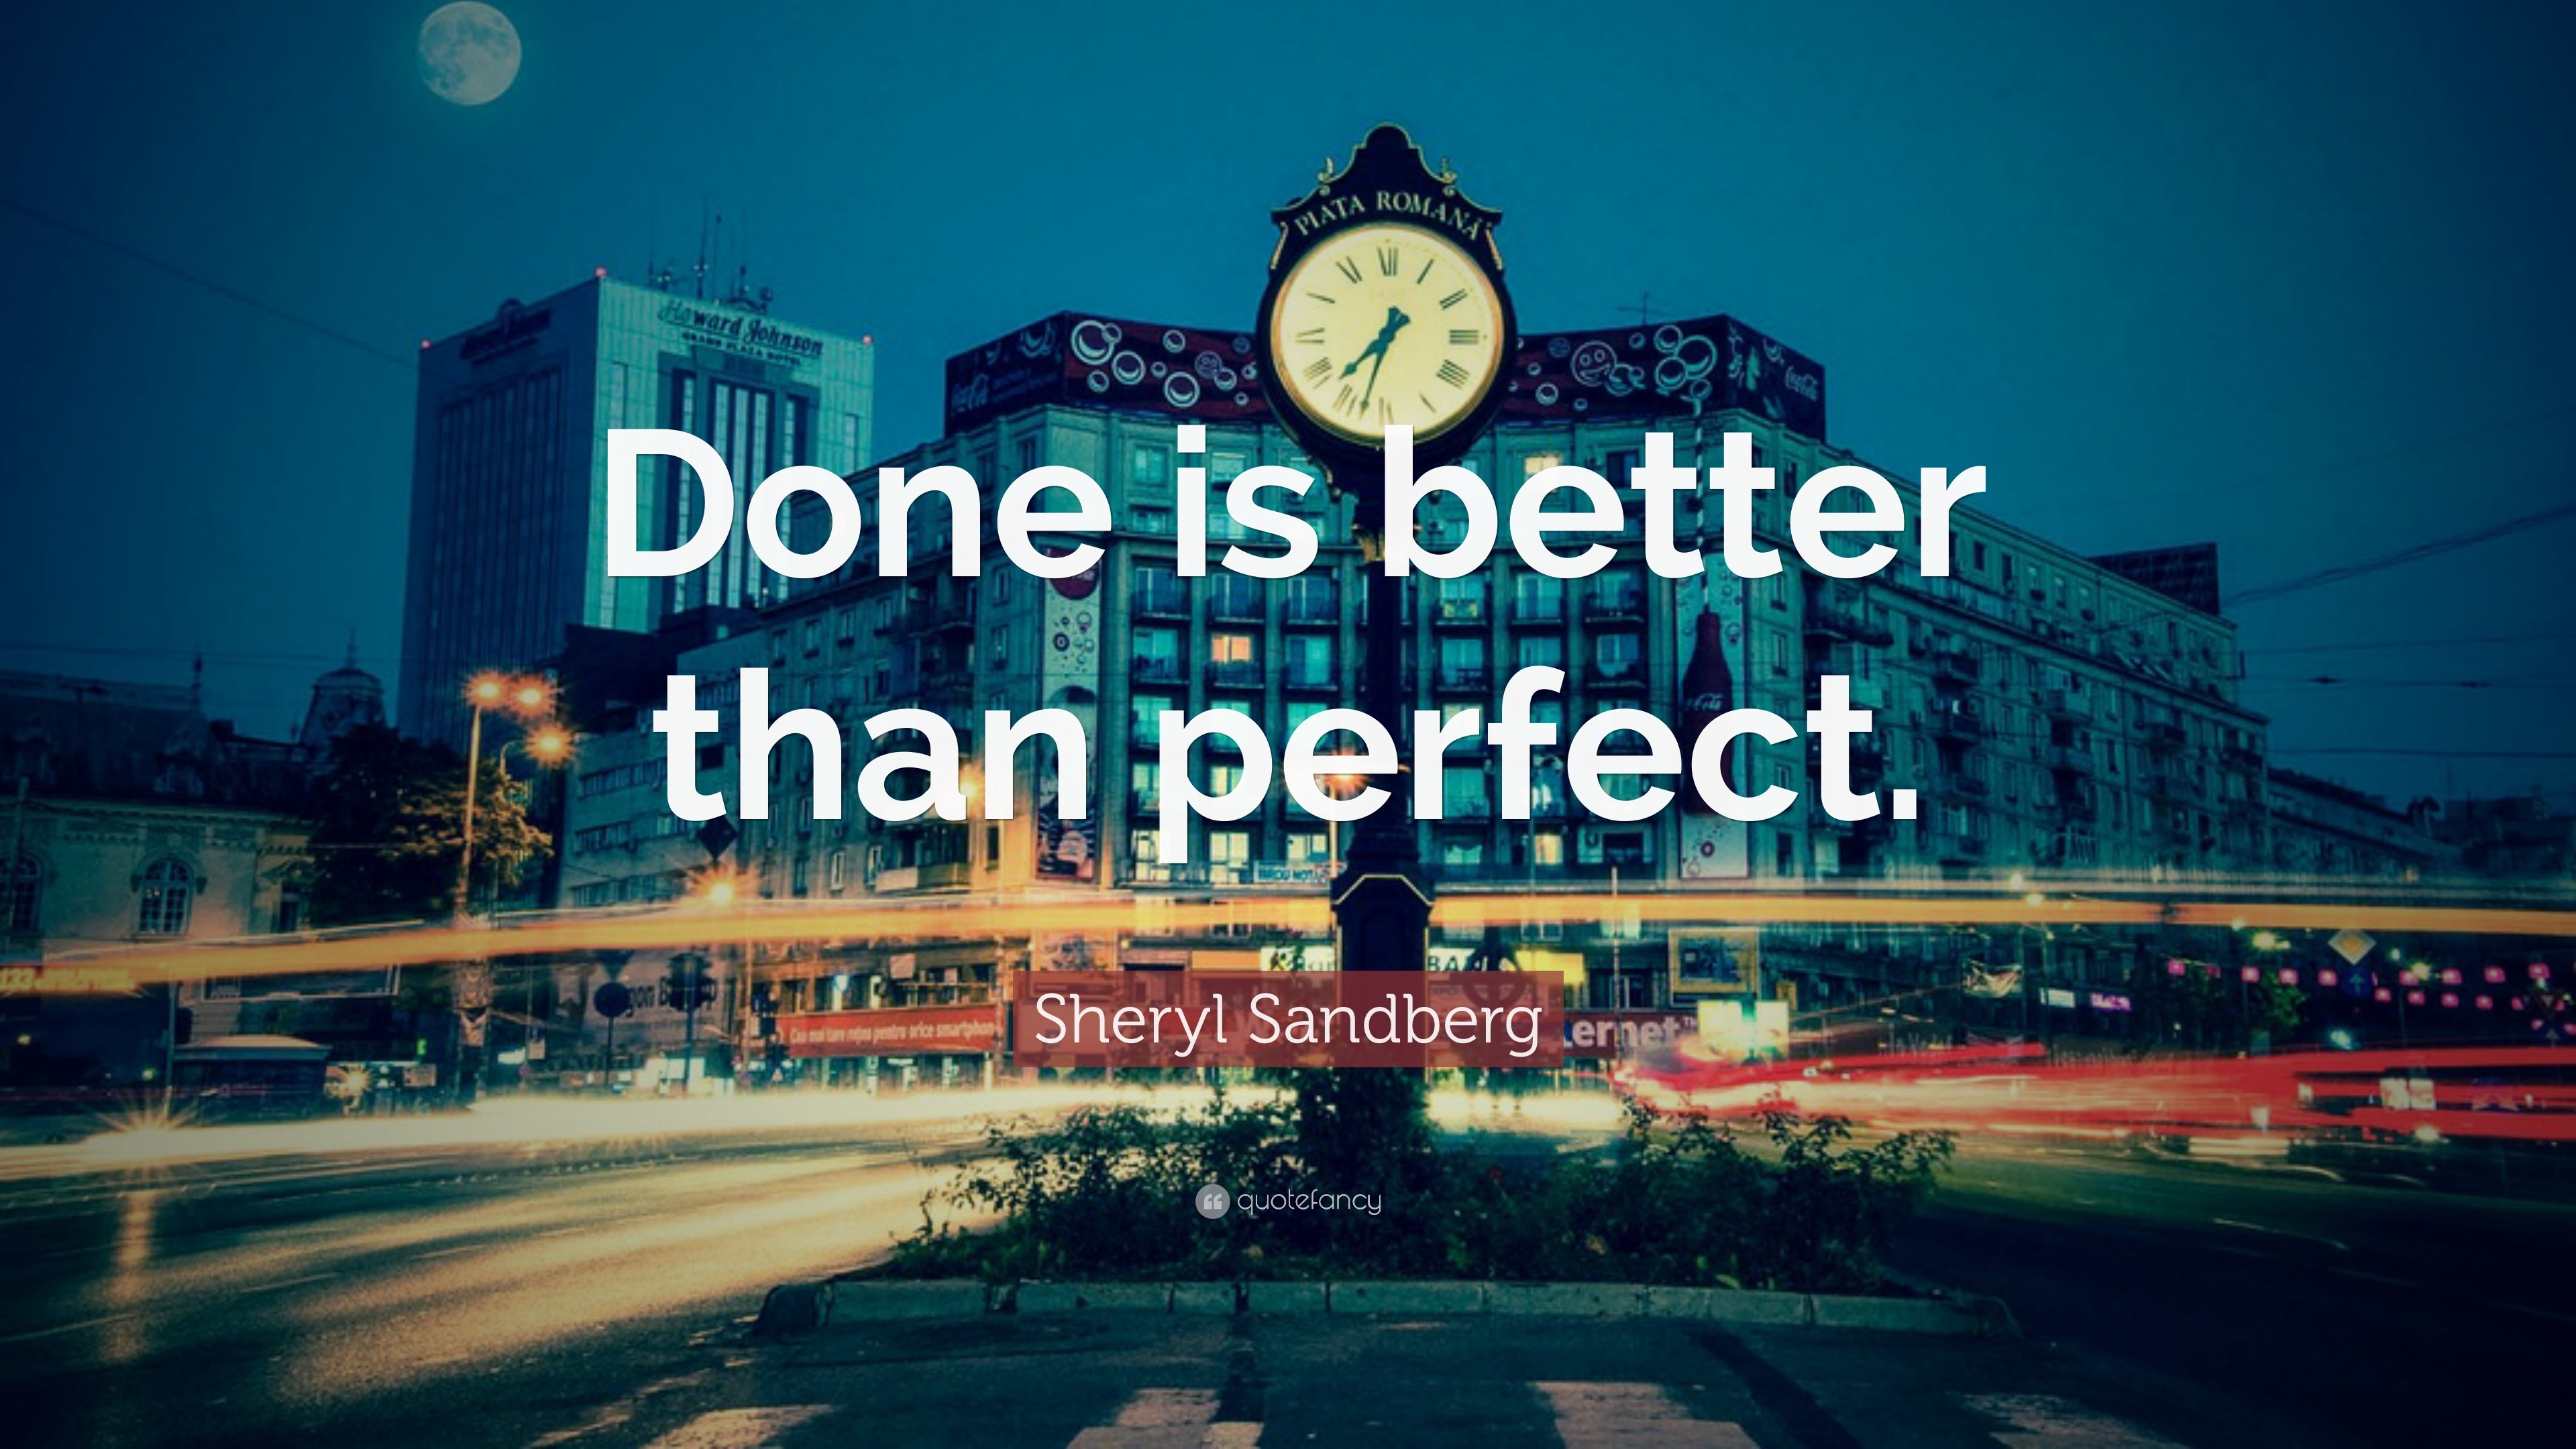 Sheryl Sandberg Quote: “Done is better than perfect.” (23 wallpapers